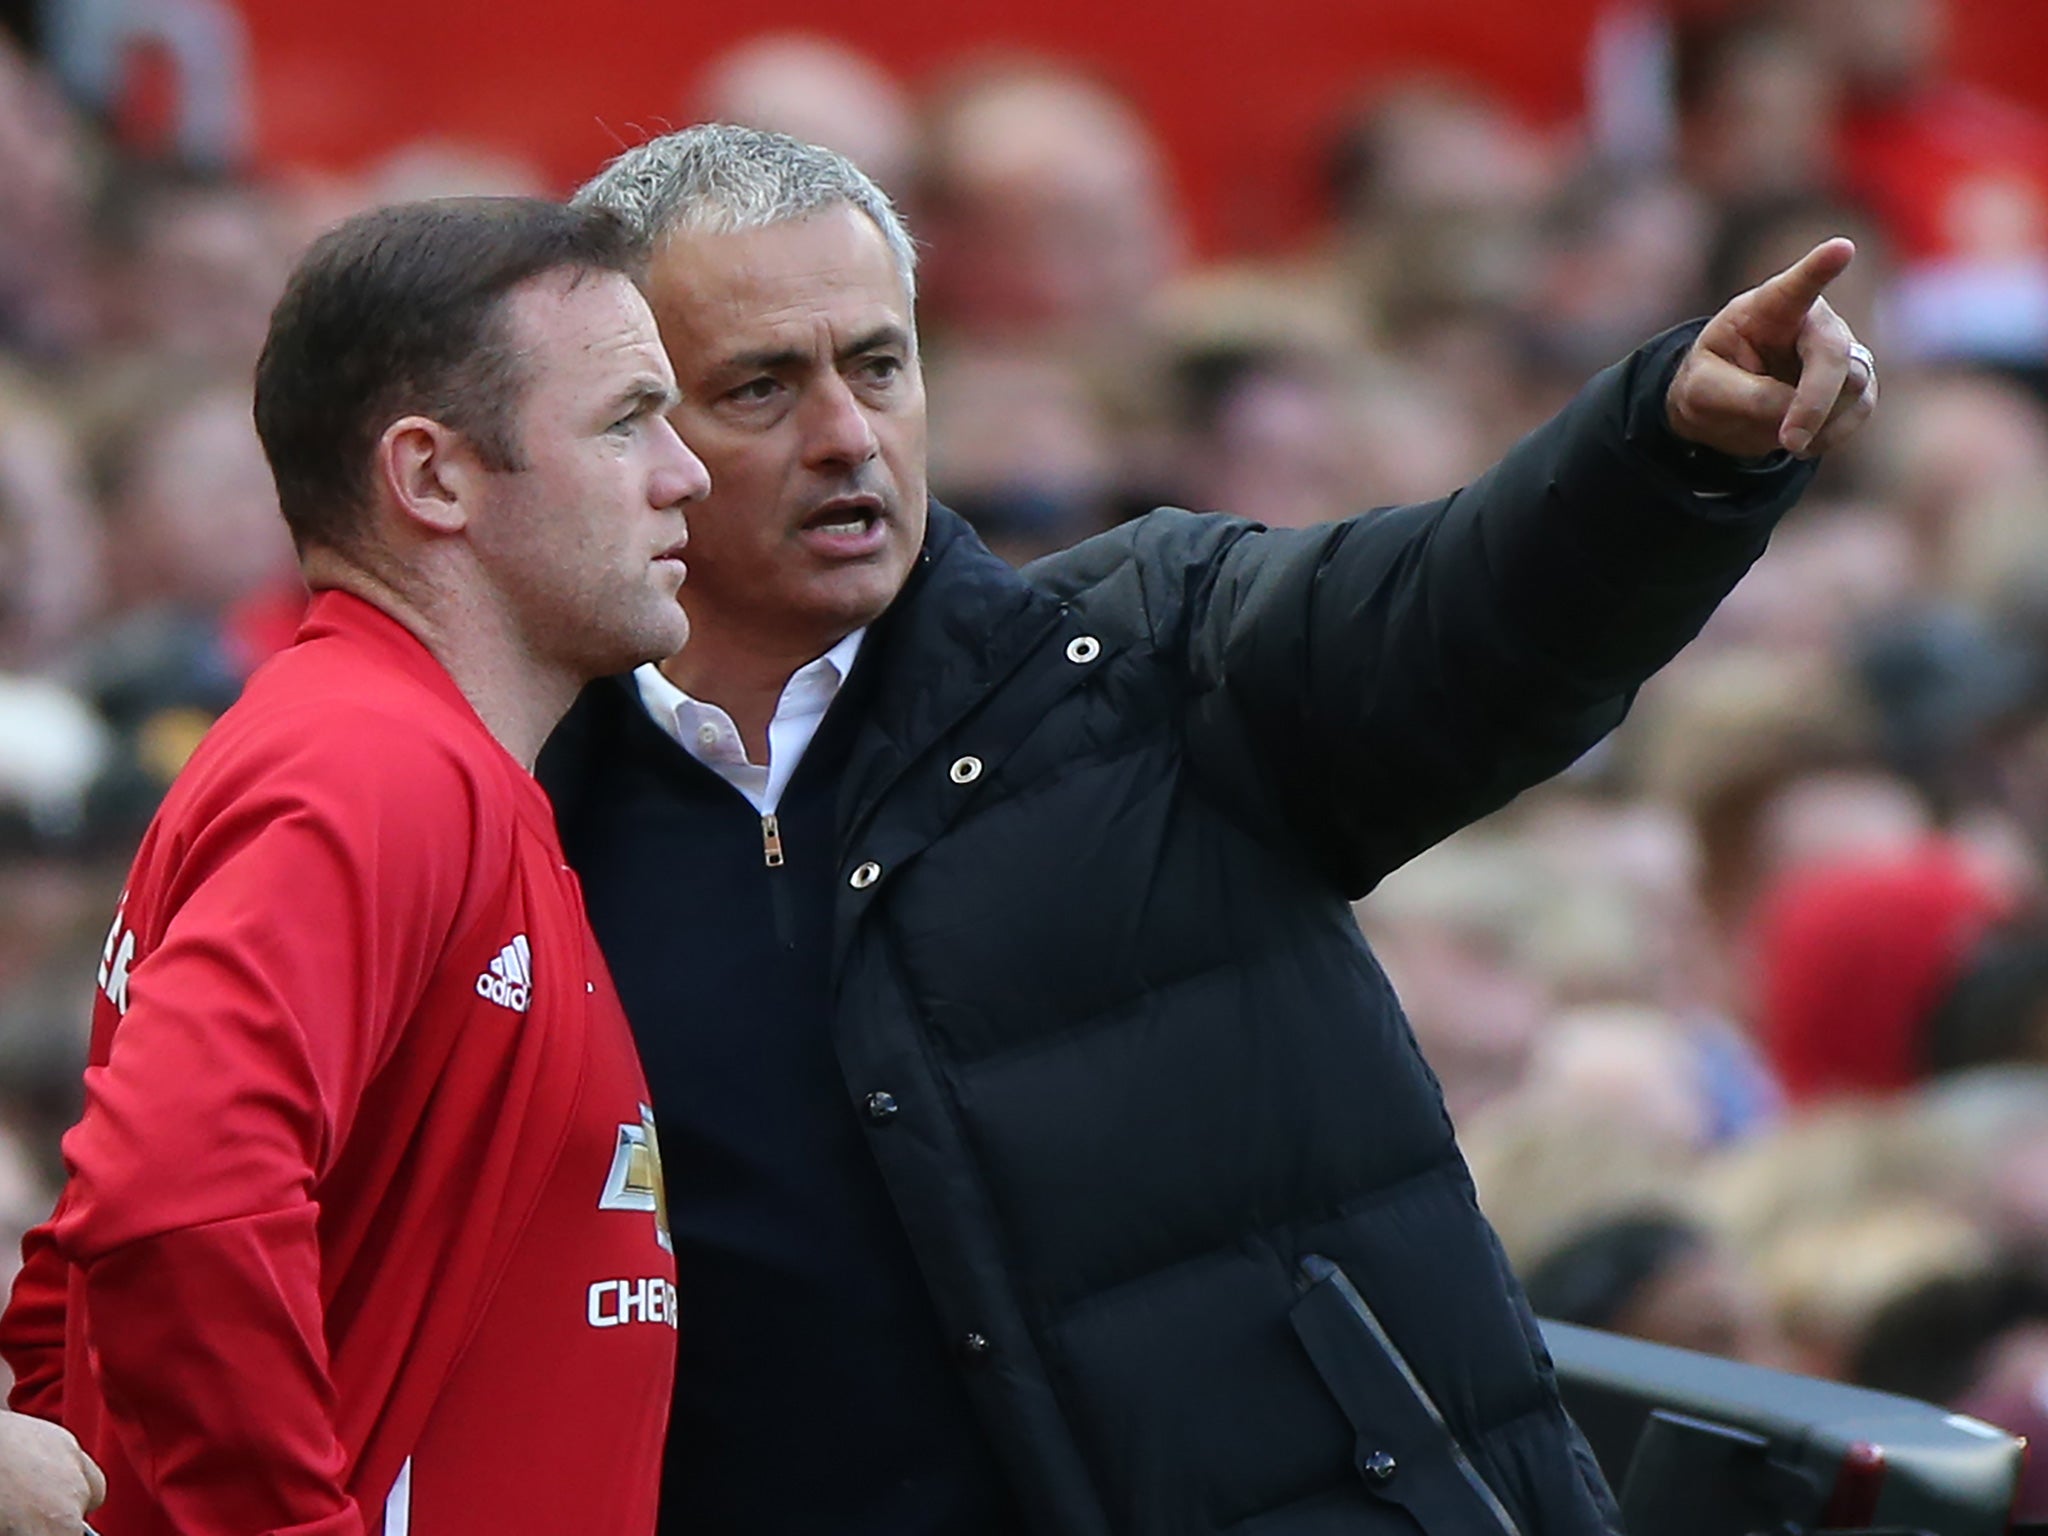 Rooney has been dropped at club level by Jose Mourinho